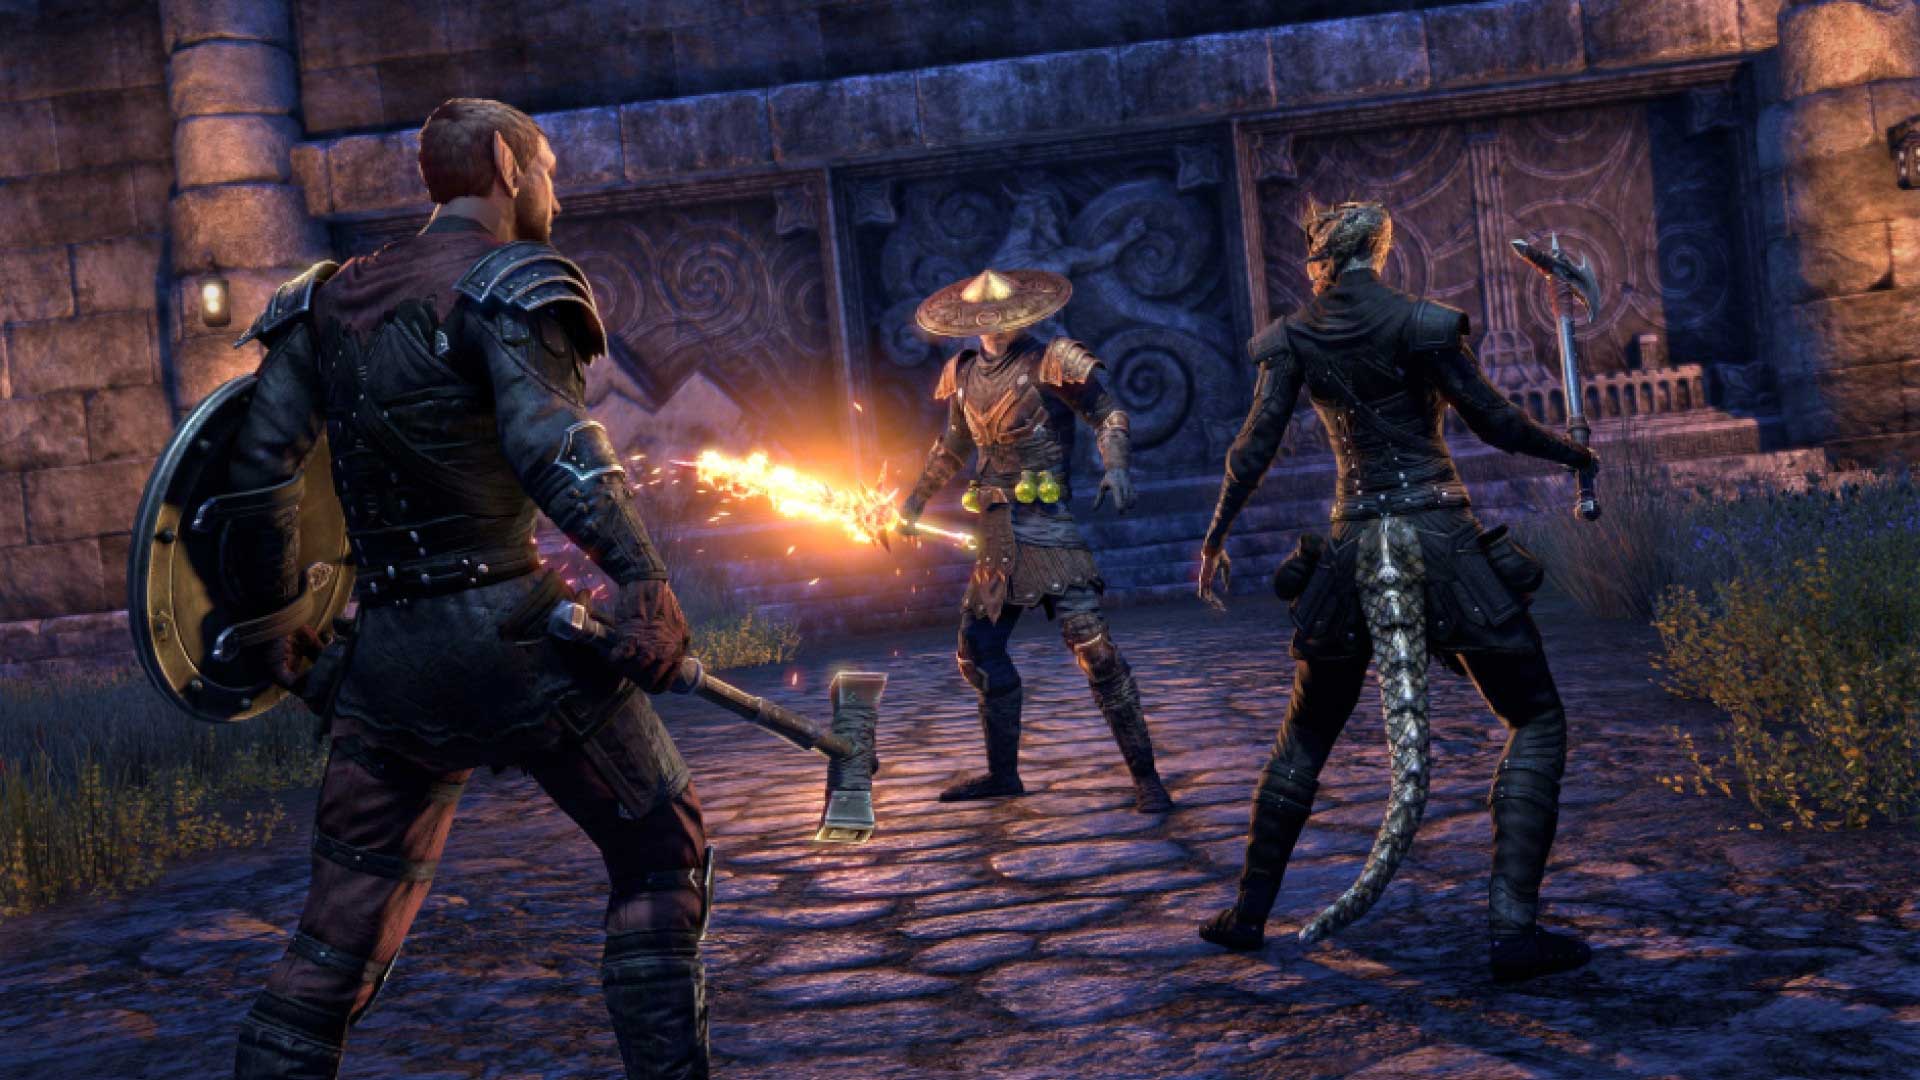 The Elder Scrolls Online – Flames of Ambition “Black Drake Villa” Could Be The Best Dungeon Yet